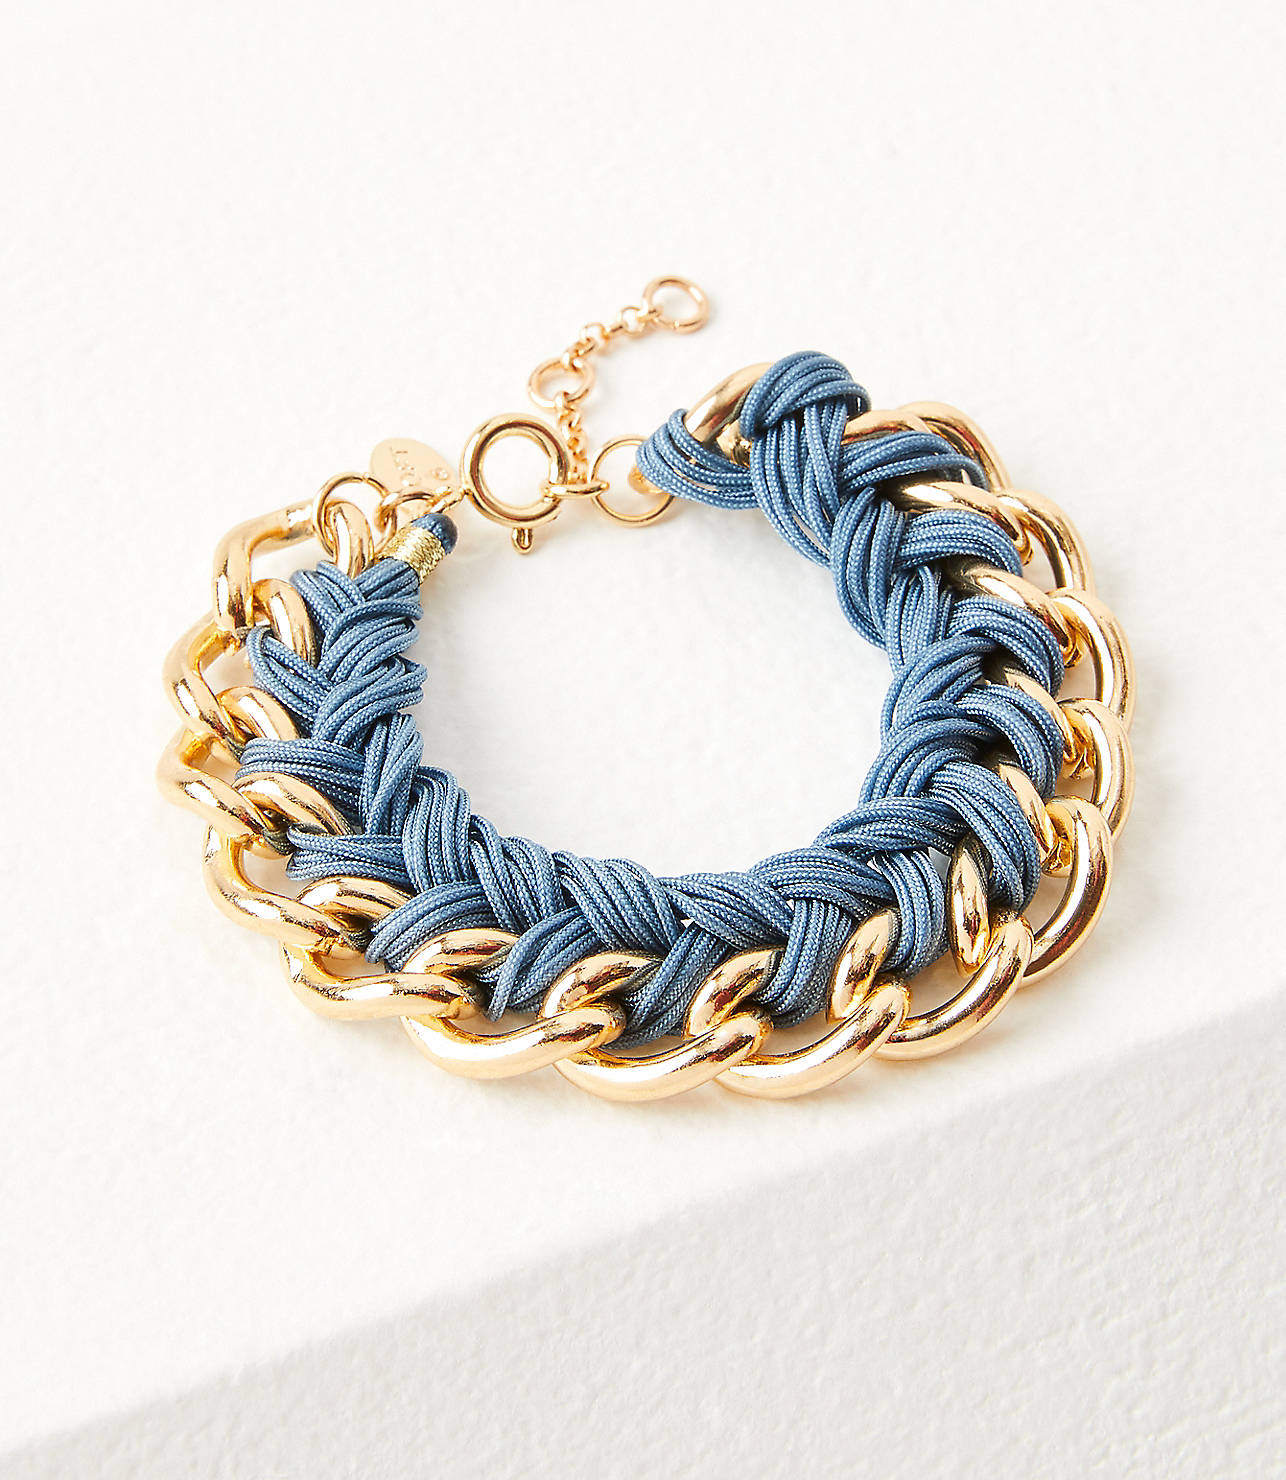 Fabric Wrapped Chain Bracelet